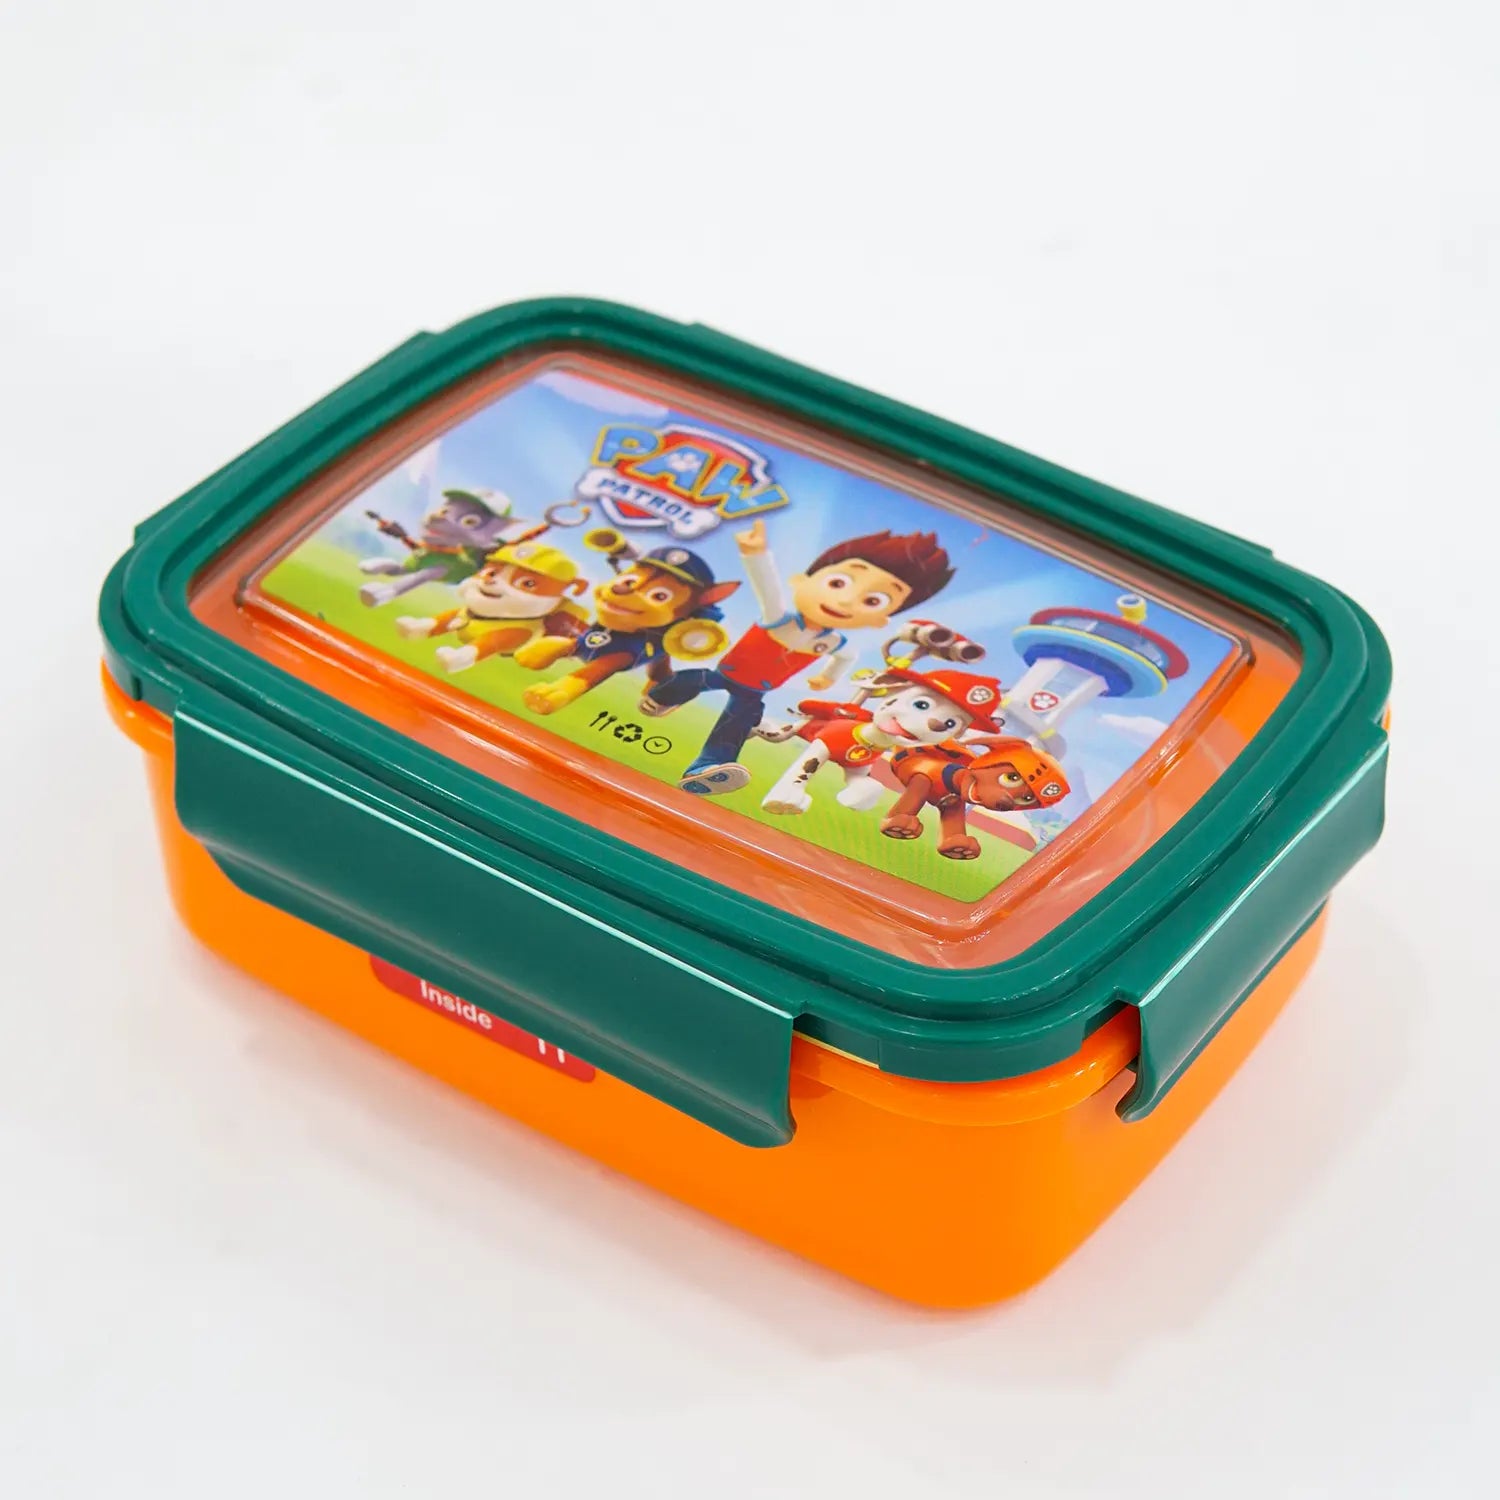 School Days Combo: High-Quality Food-Grade Plastic Lunch Box with Spoon and Bonus Snack Box